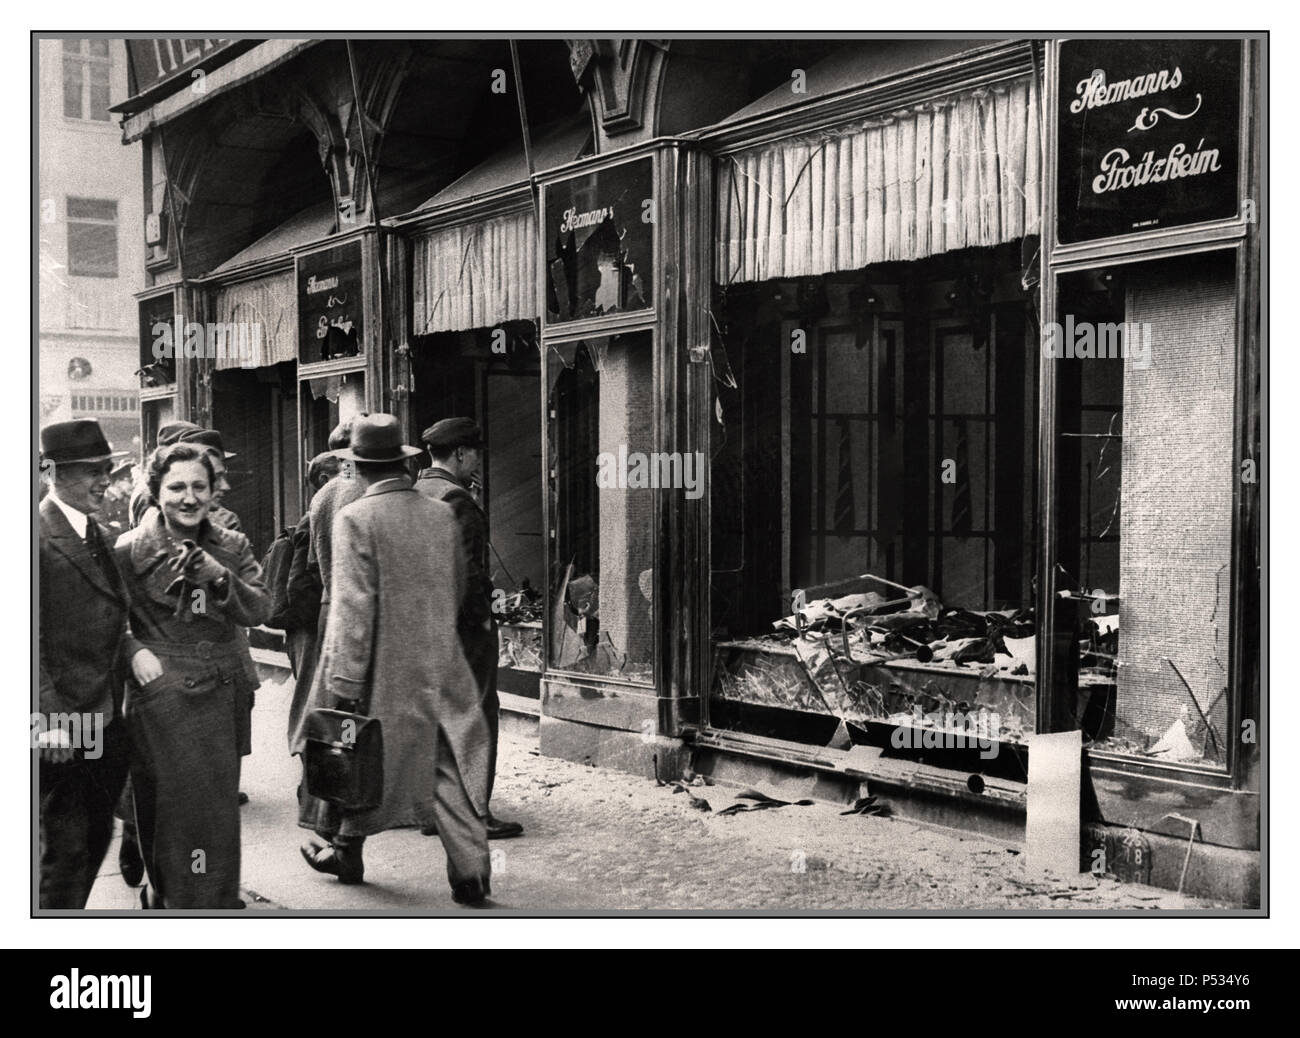 KRISTALLNACHT BERLIN JEWISH SHOP FRONT Shattered storefront of a Jewish-owned shop destroyed by Nazi NSDAP sympathisers during Kristallnacht (the 'Night of Broken Glass'). Berlin, Germany, November 10, 1938. Passing onlookers apparently smiling in appreciation...Berlin Germany Stock Photo